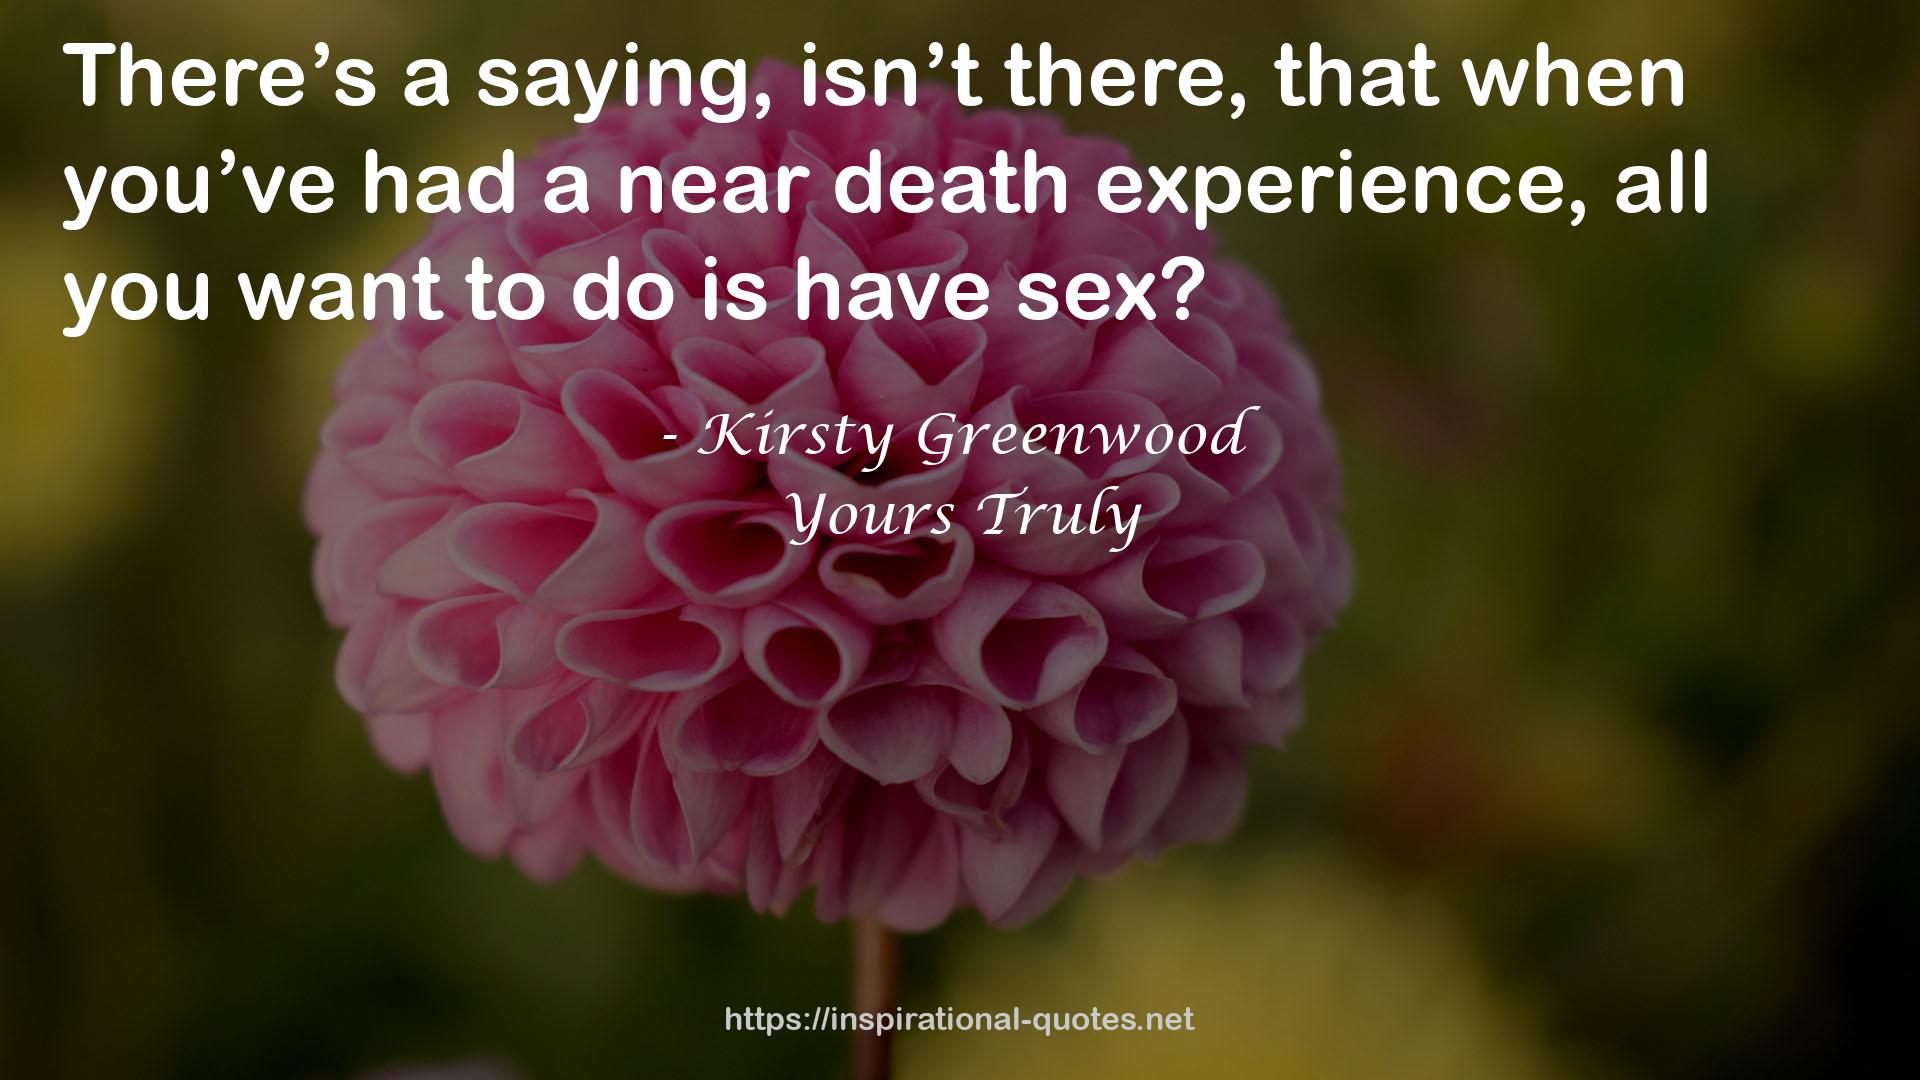 Kirsty Greenwood QUOTES